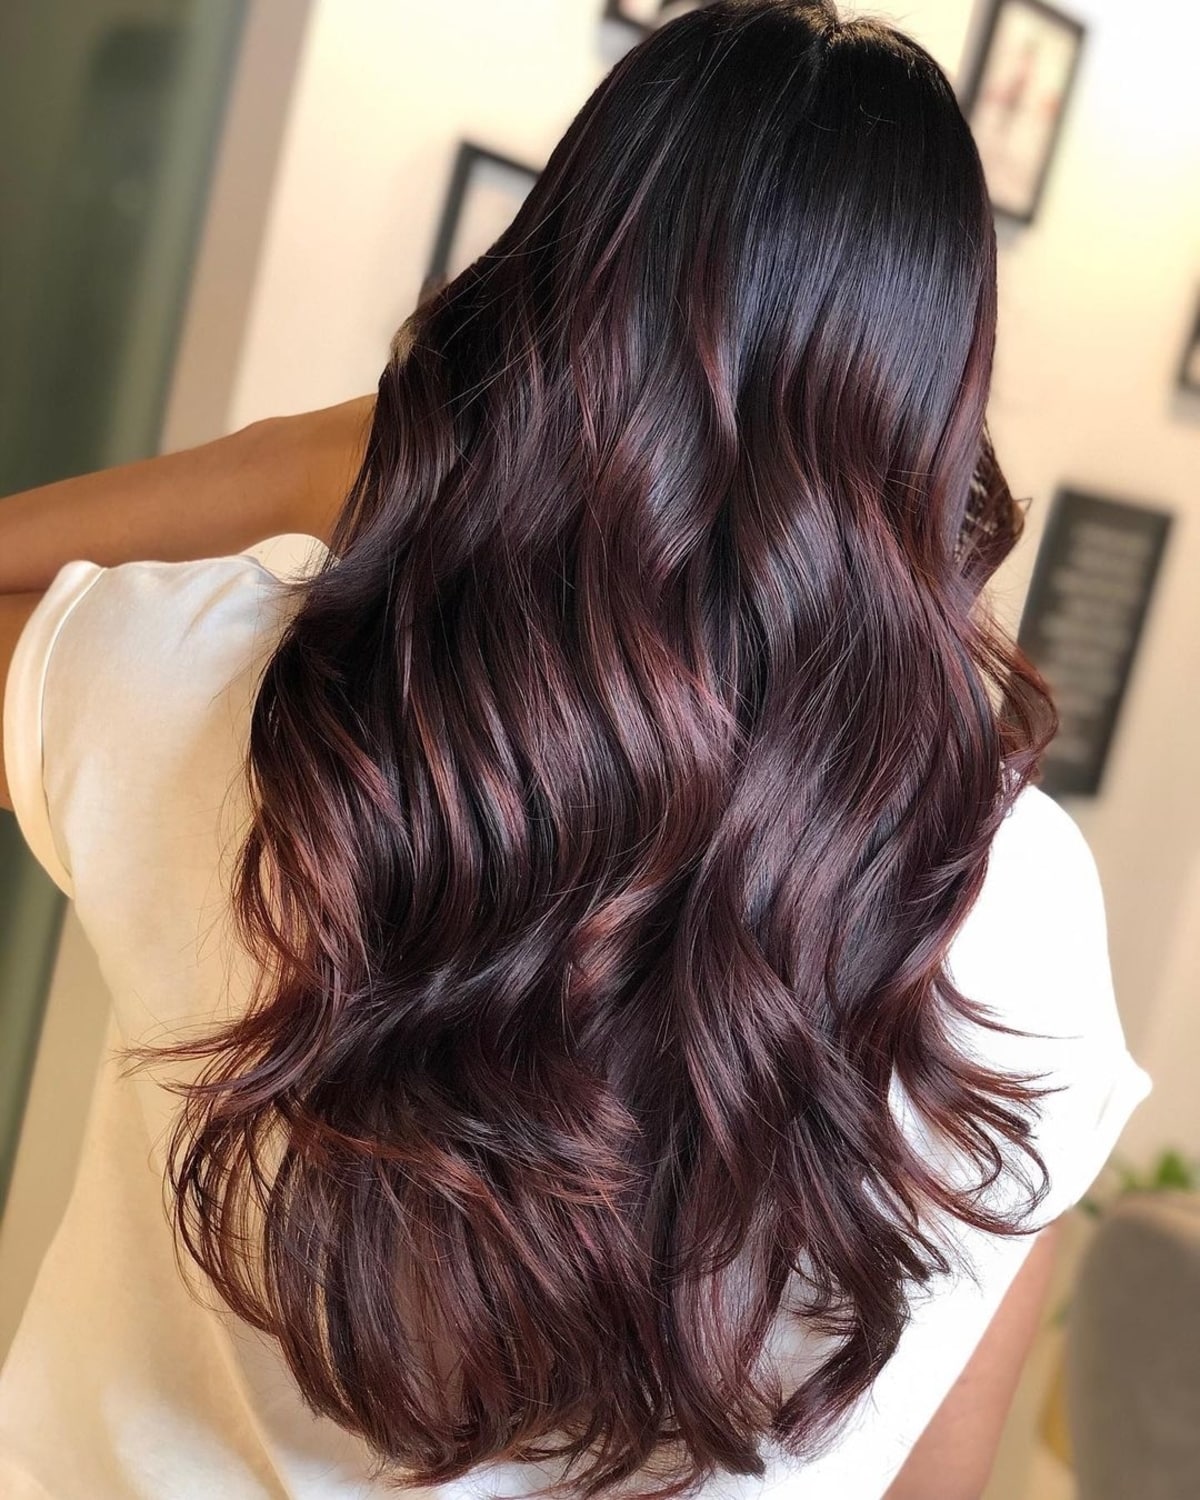 Dark Burgundy Hair Is The Coolest Winter 2022 Hair Color Trend